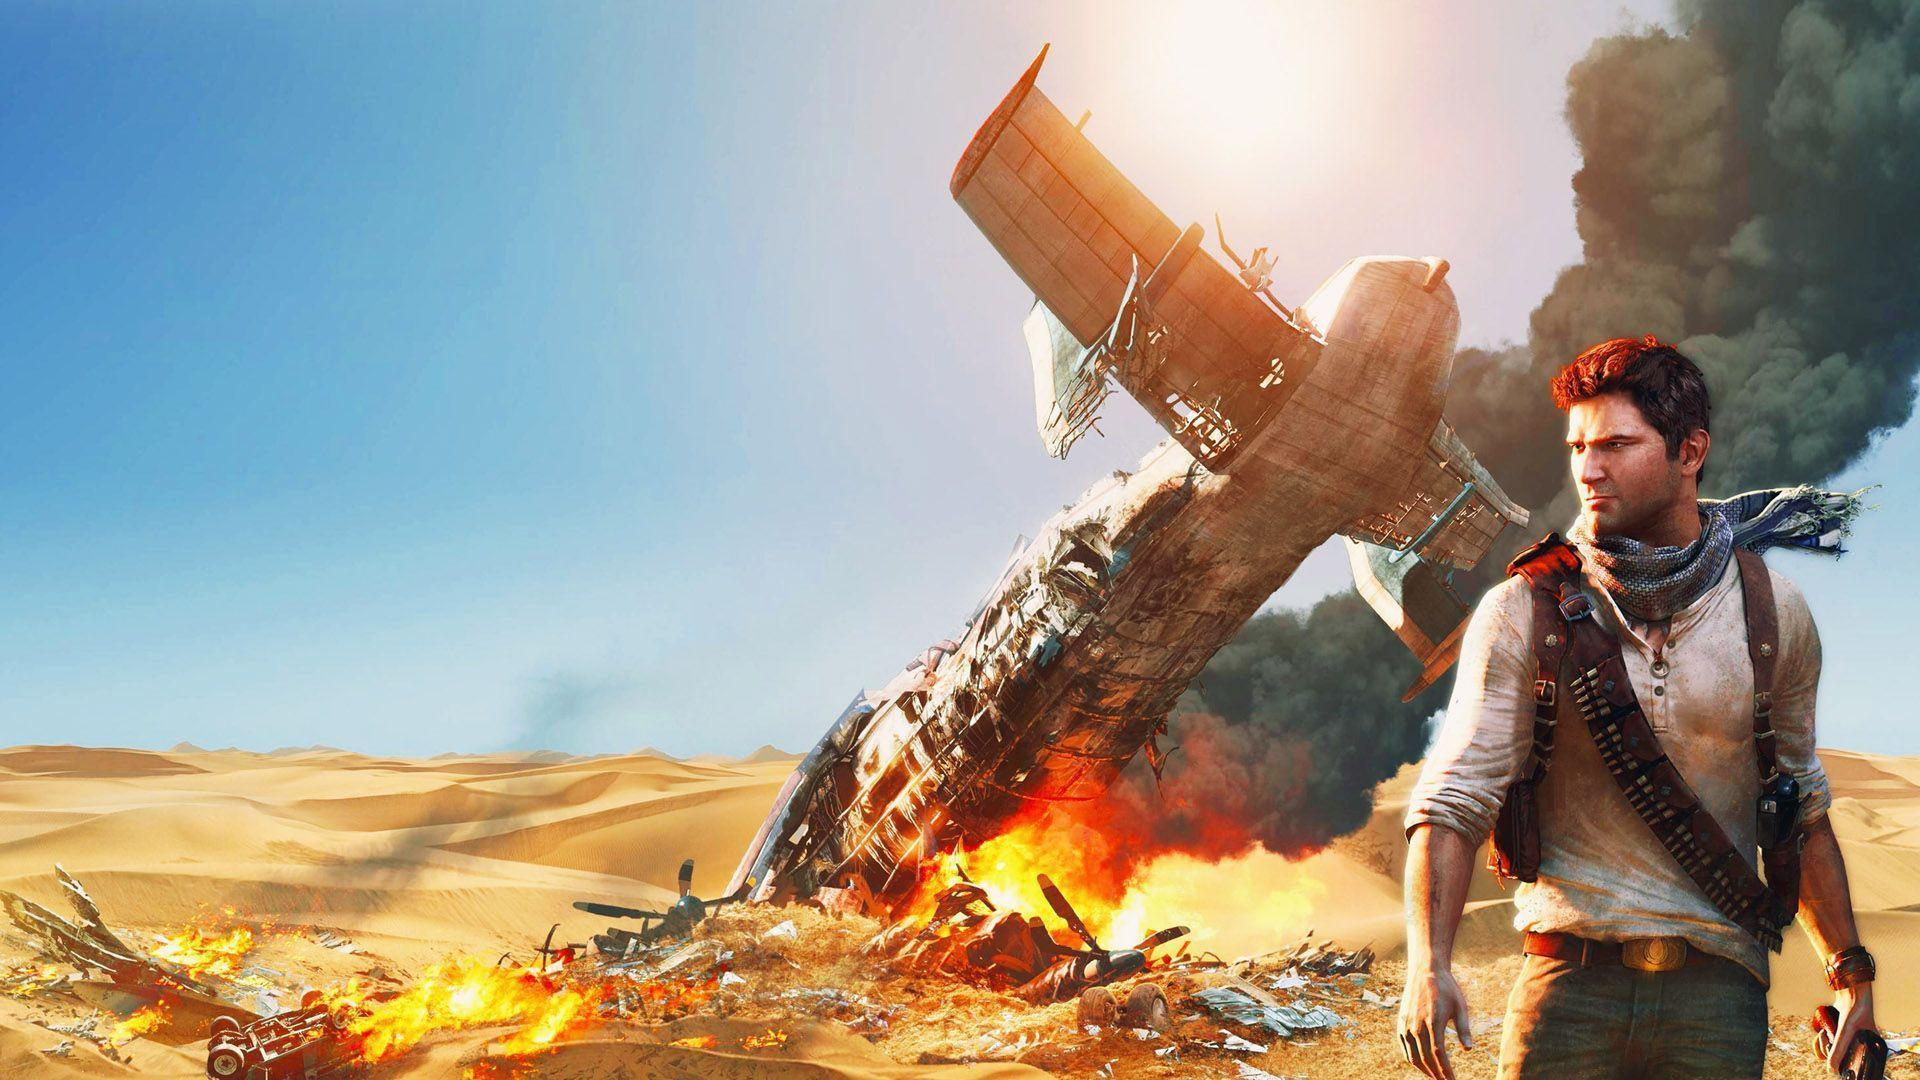 Uncharted Wallpaper Photo, Uncharted, Game